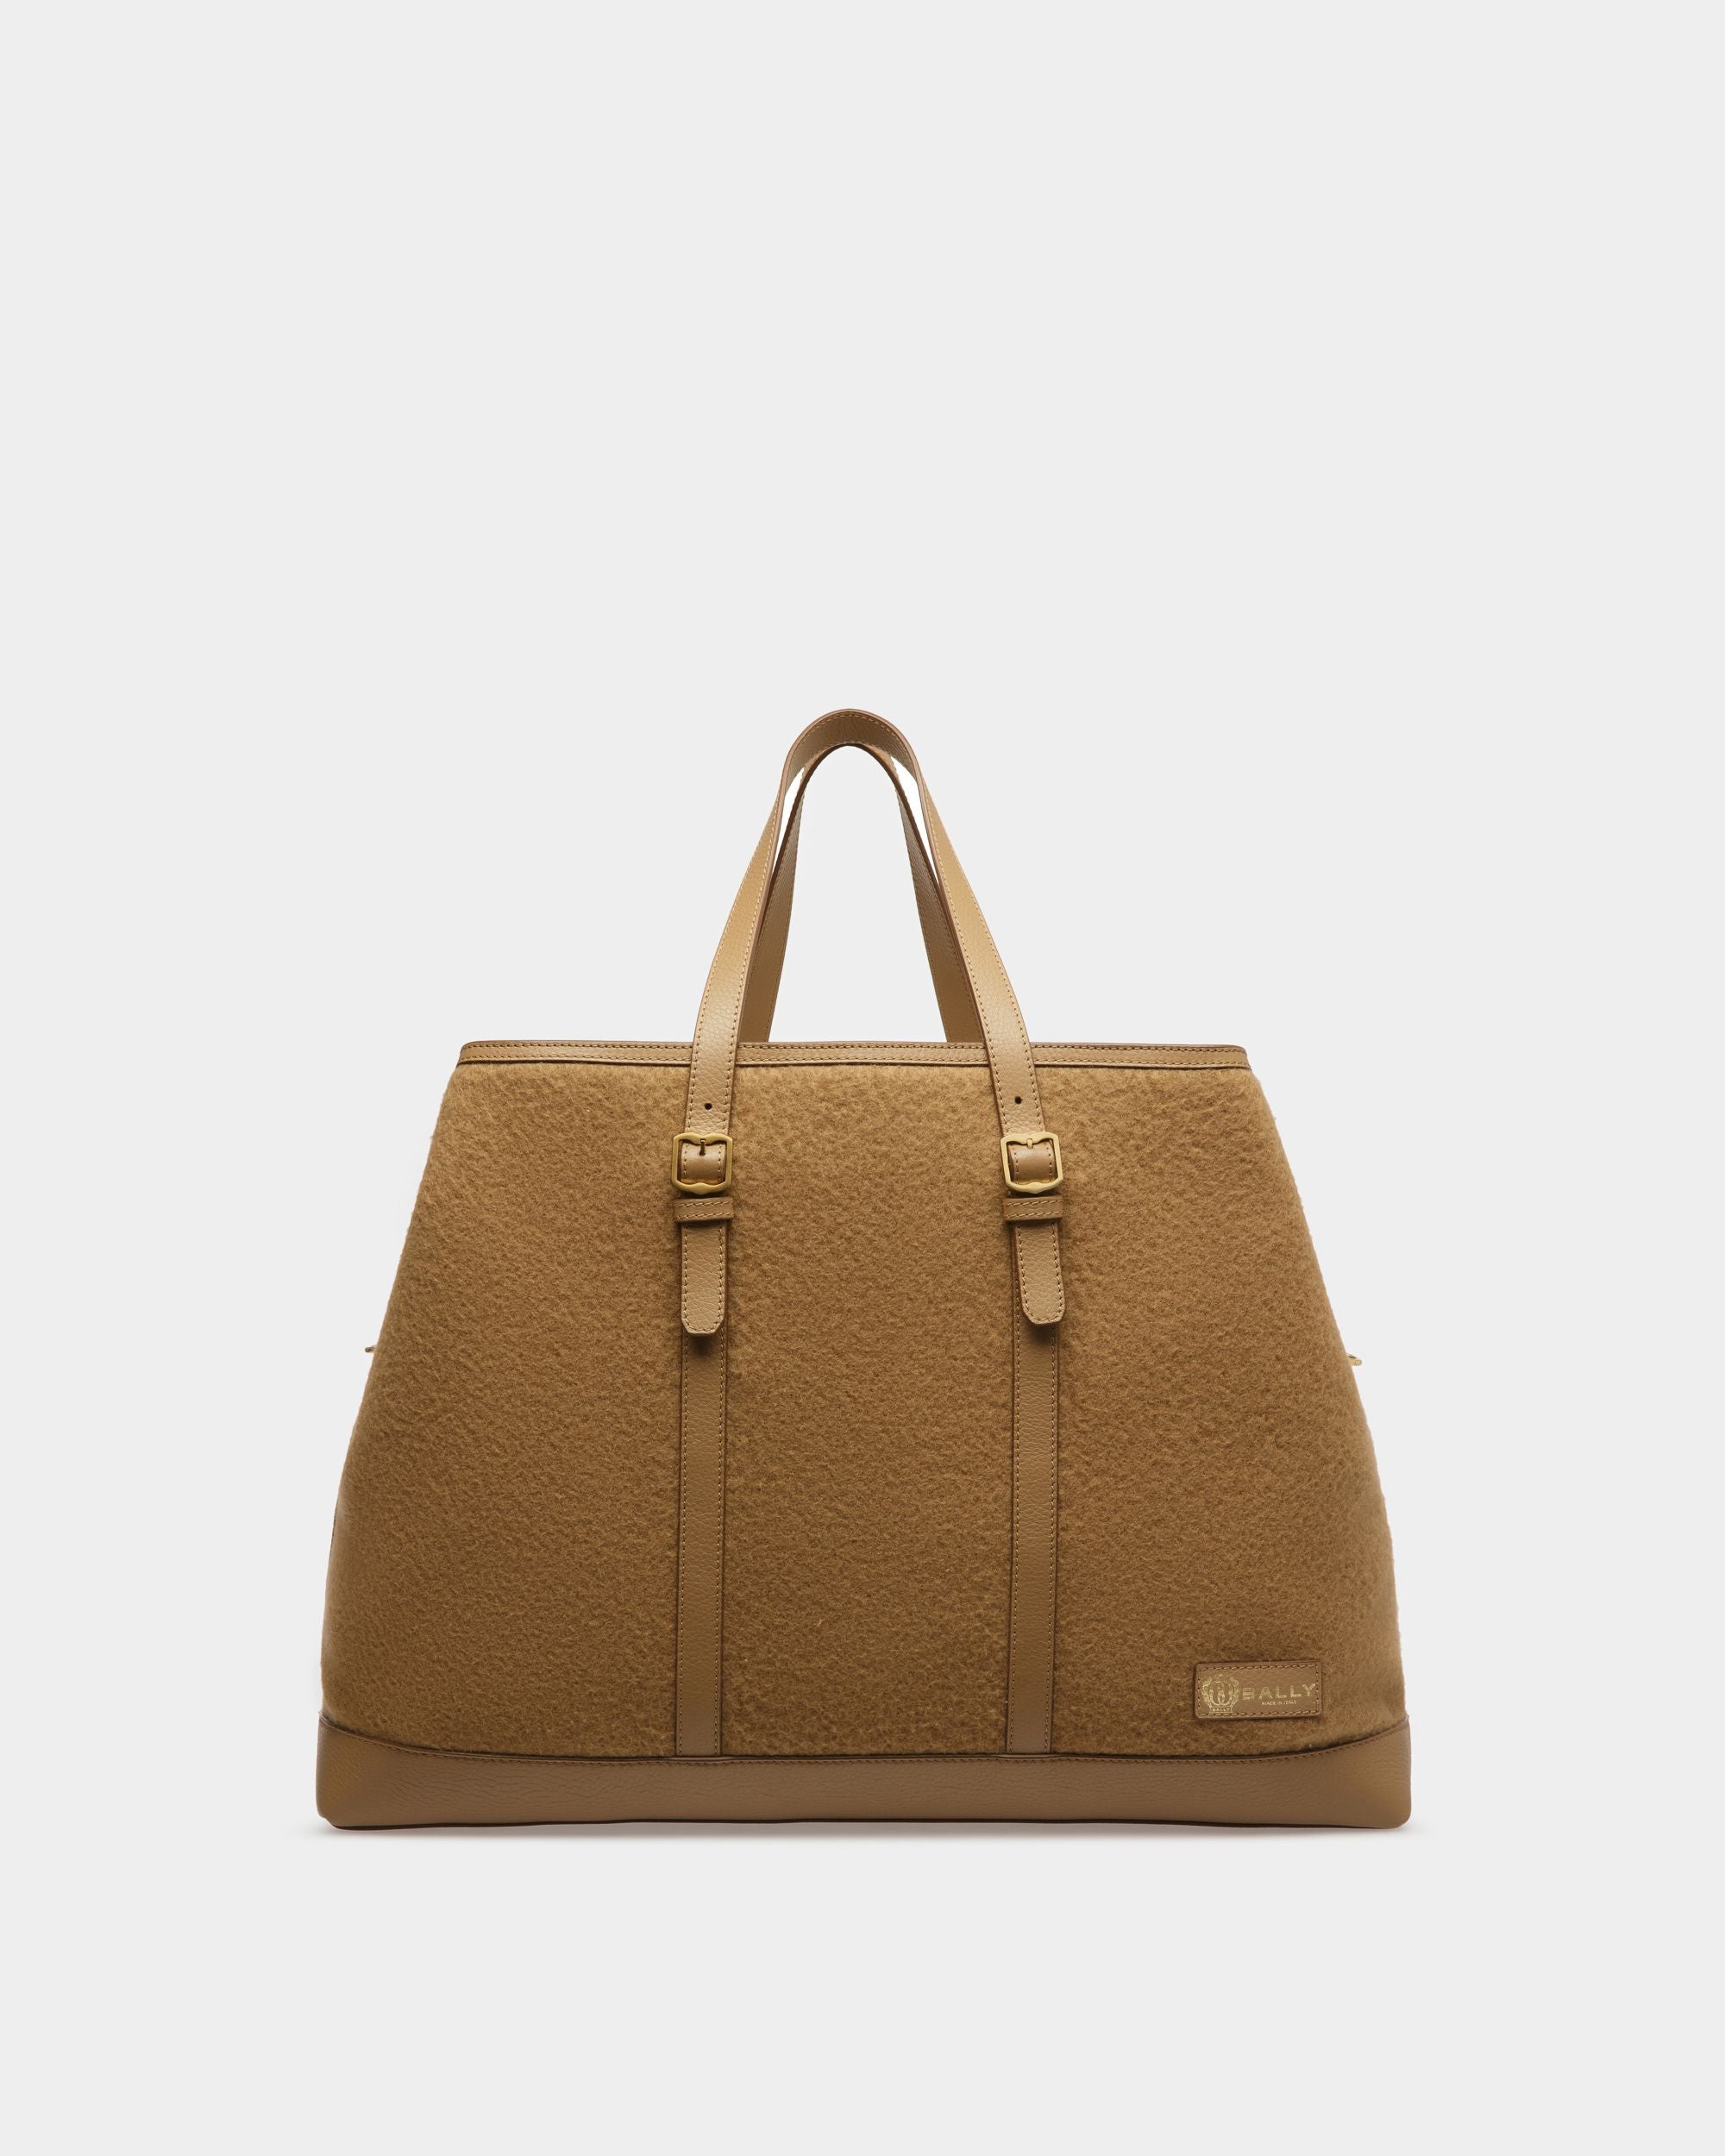 Extra Large 4 Buckles | Men's Tote Bag | Camel Leather And Fabric | Bally | Still Life Front